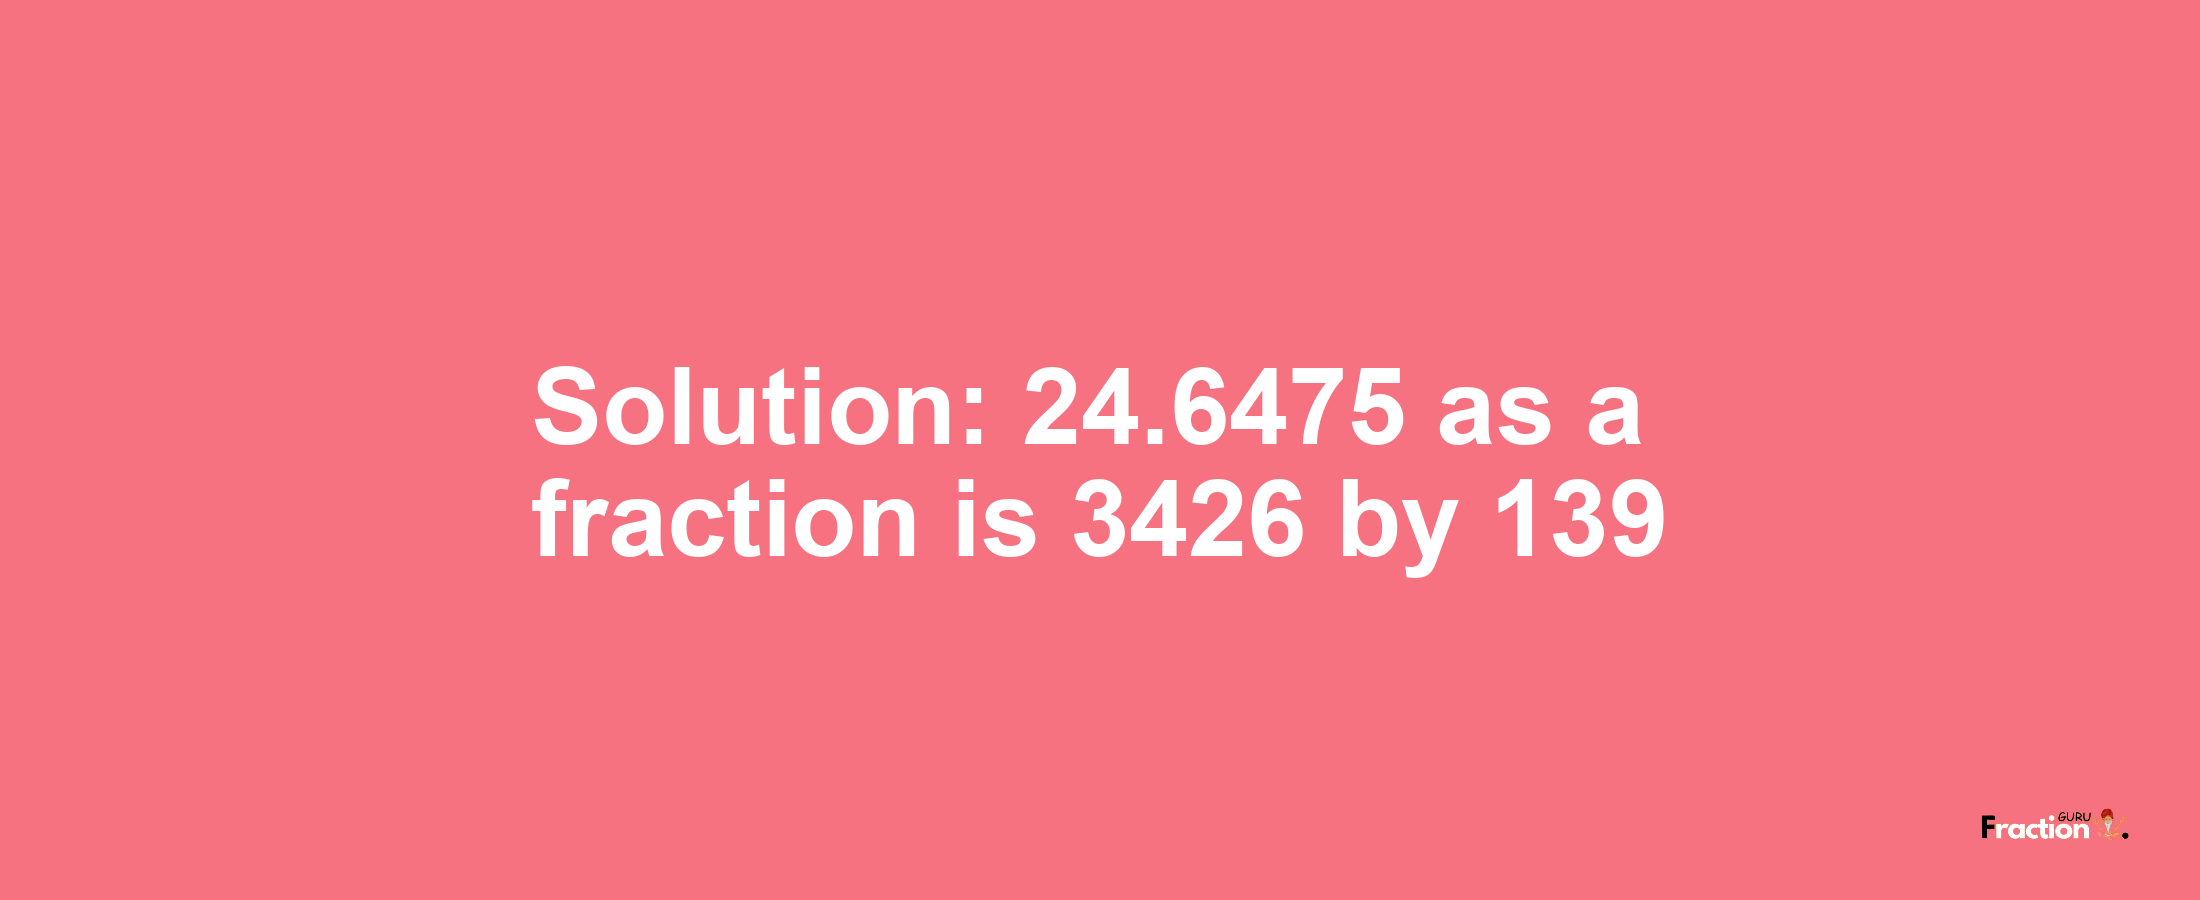 Solution:24.6475 as a fraction is 3426/139